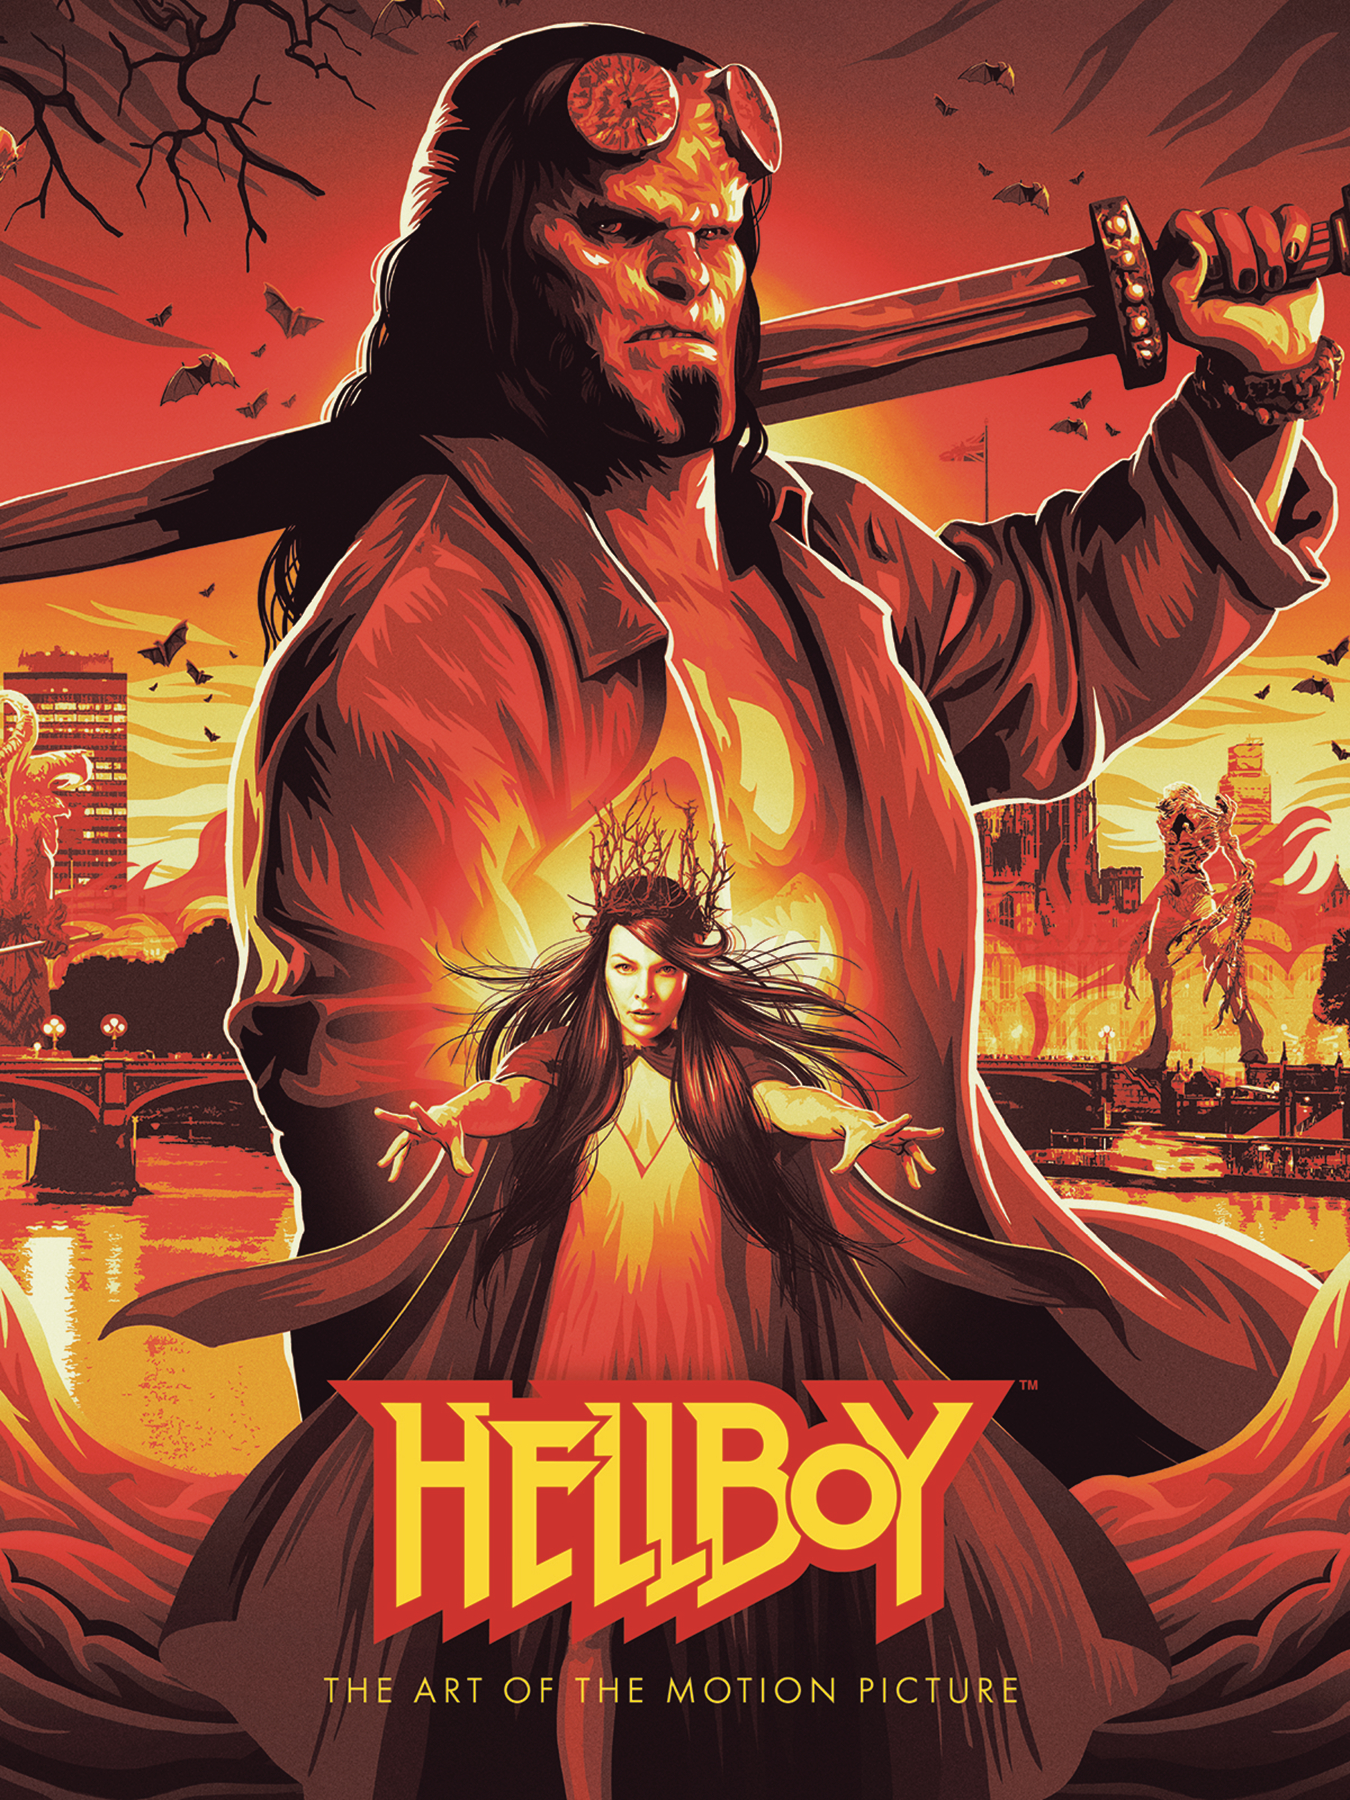 Hellboy Hardcover Art of Motion Picture